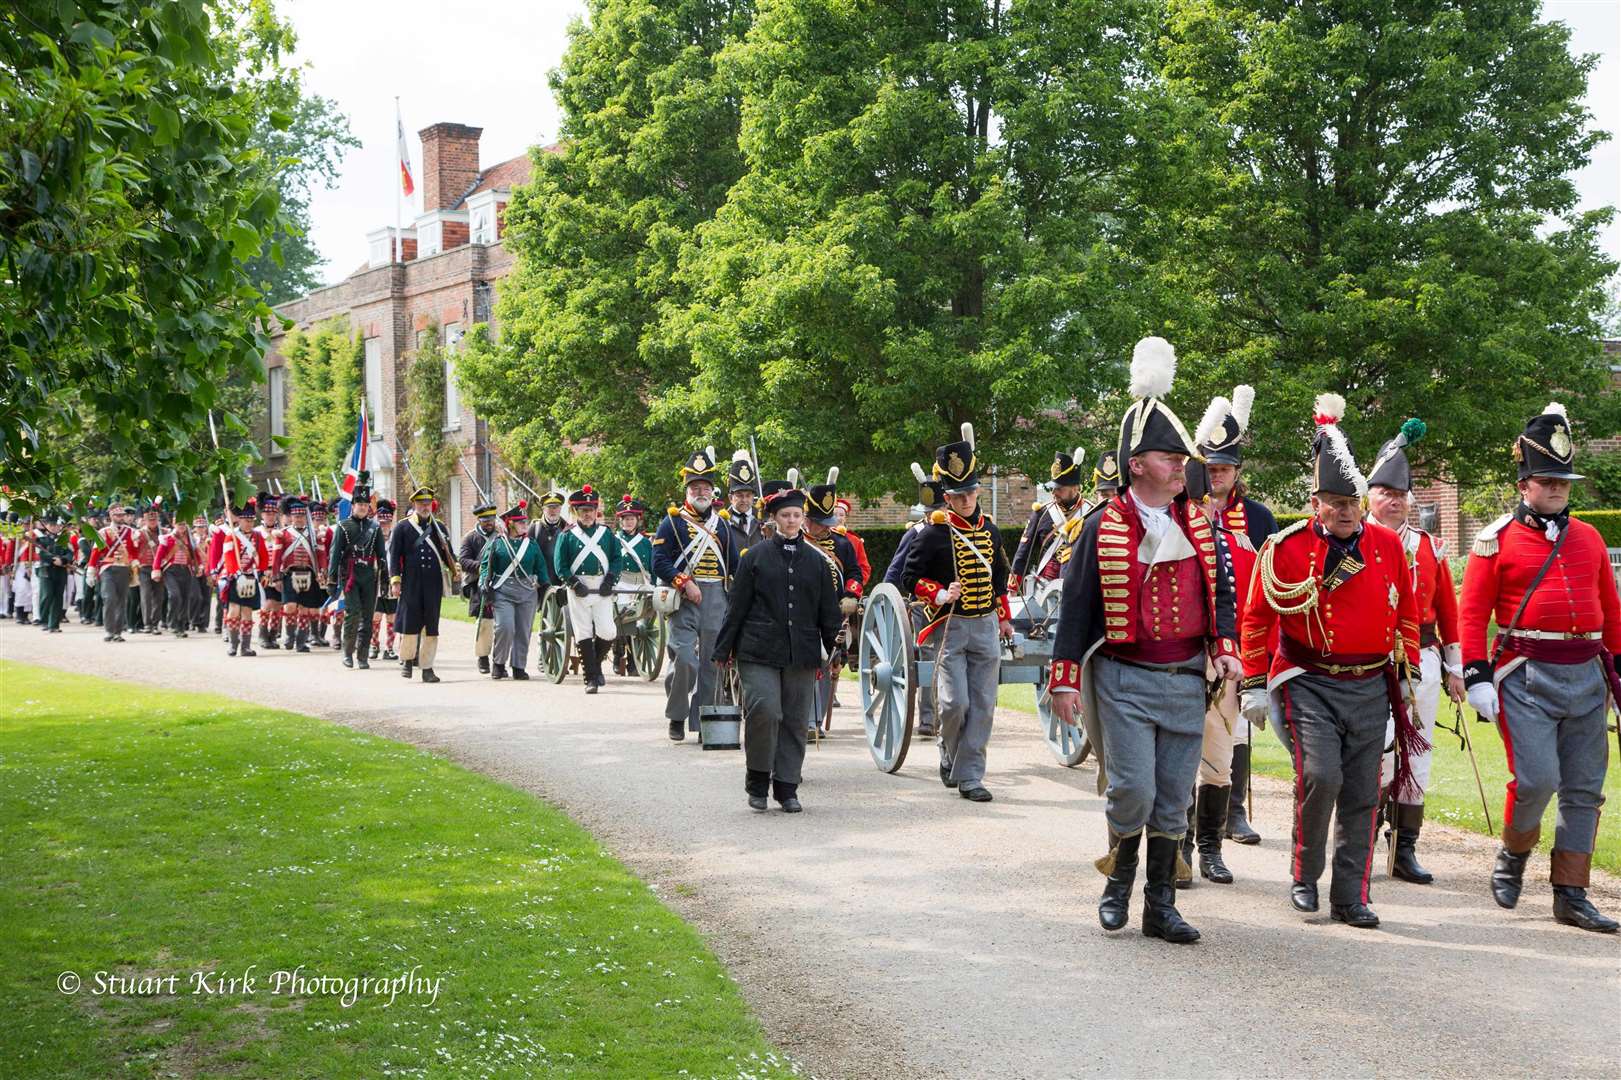 The Napoleonic Re-enactment Weekend returns to Hole Park in Rolvenden